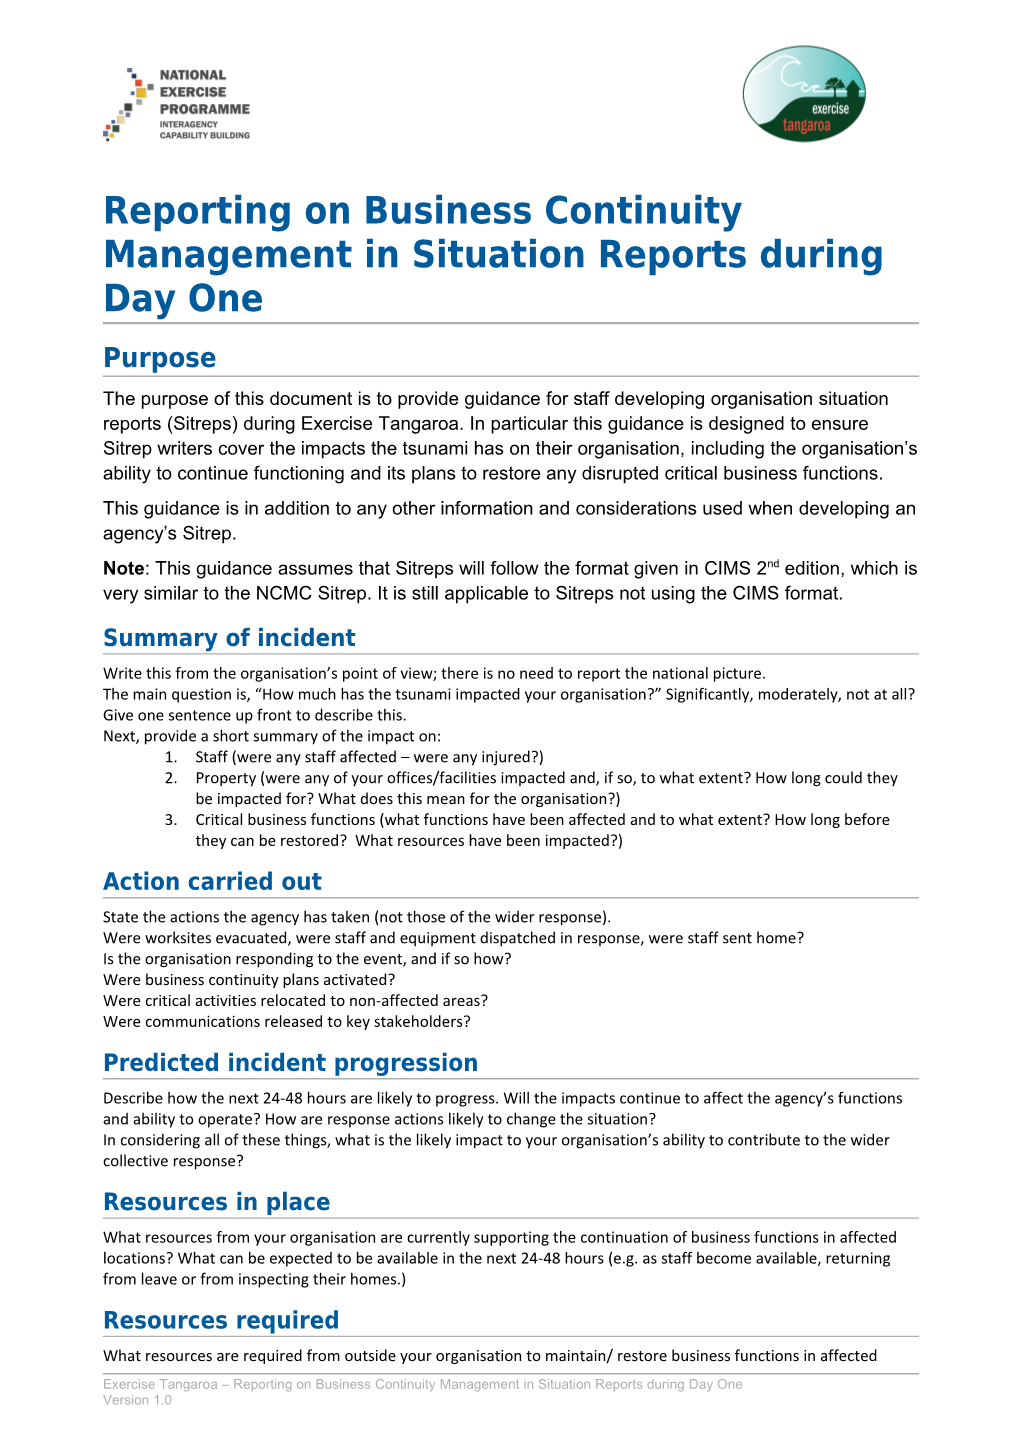 Reporting on Business Continuity Management in Situation Reports During Day One